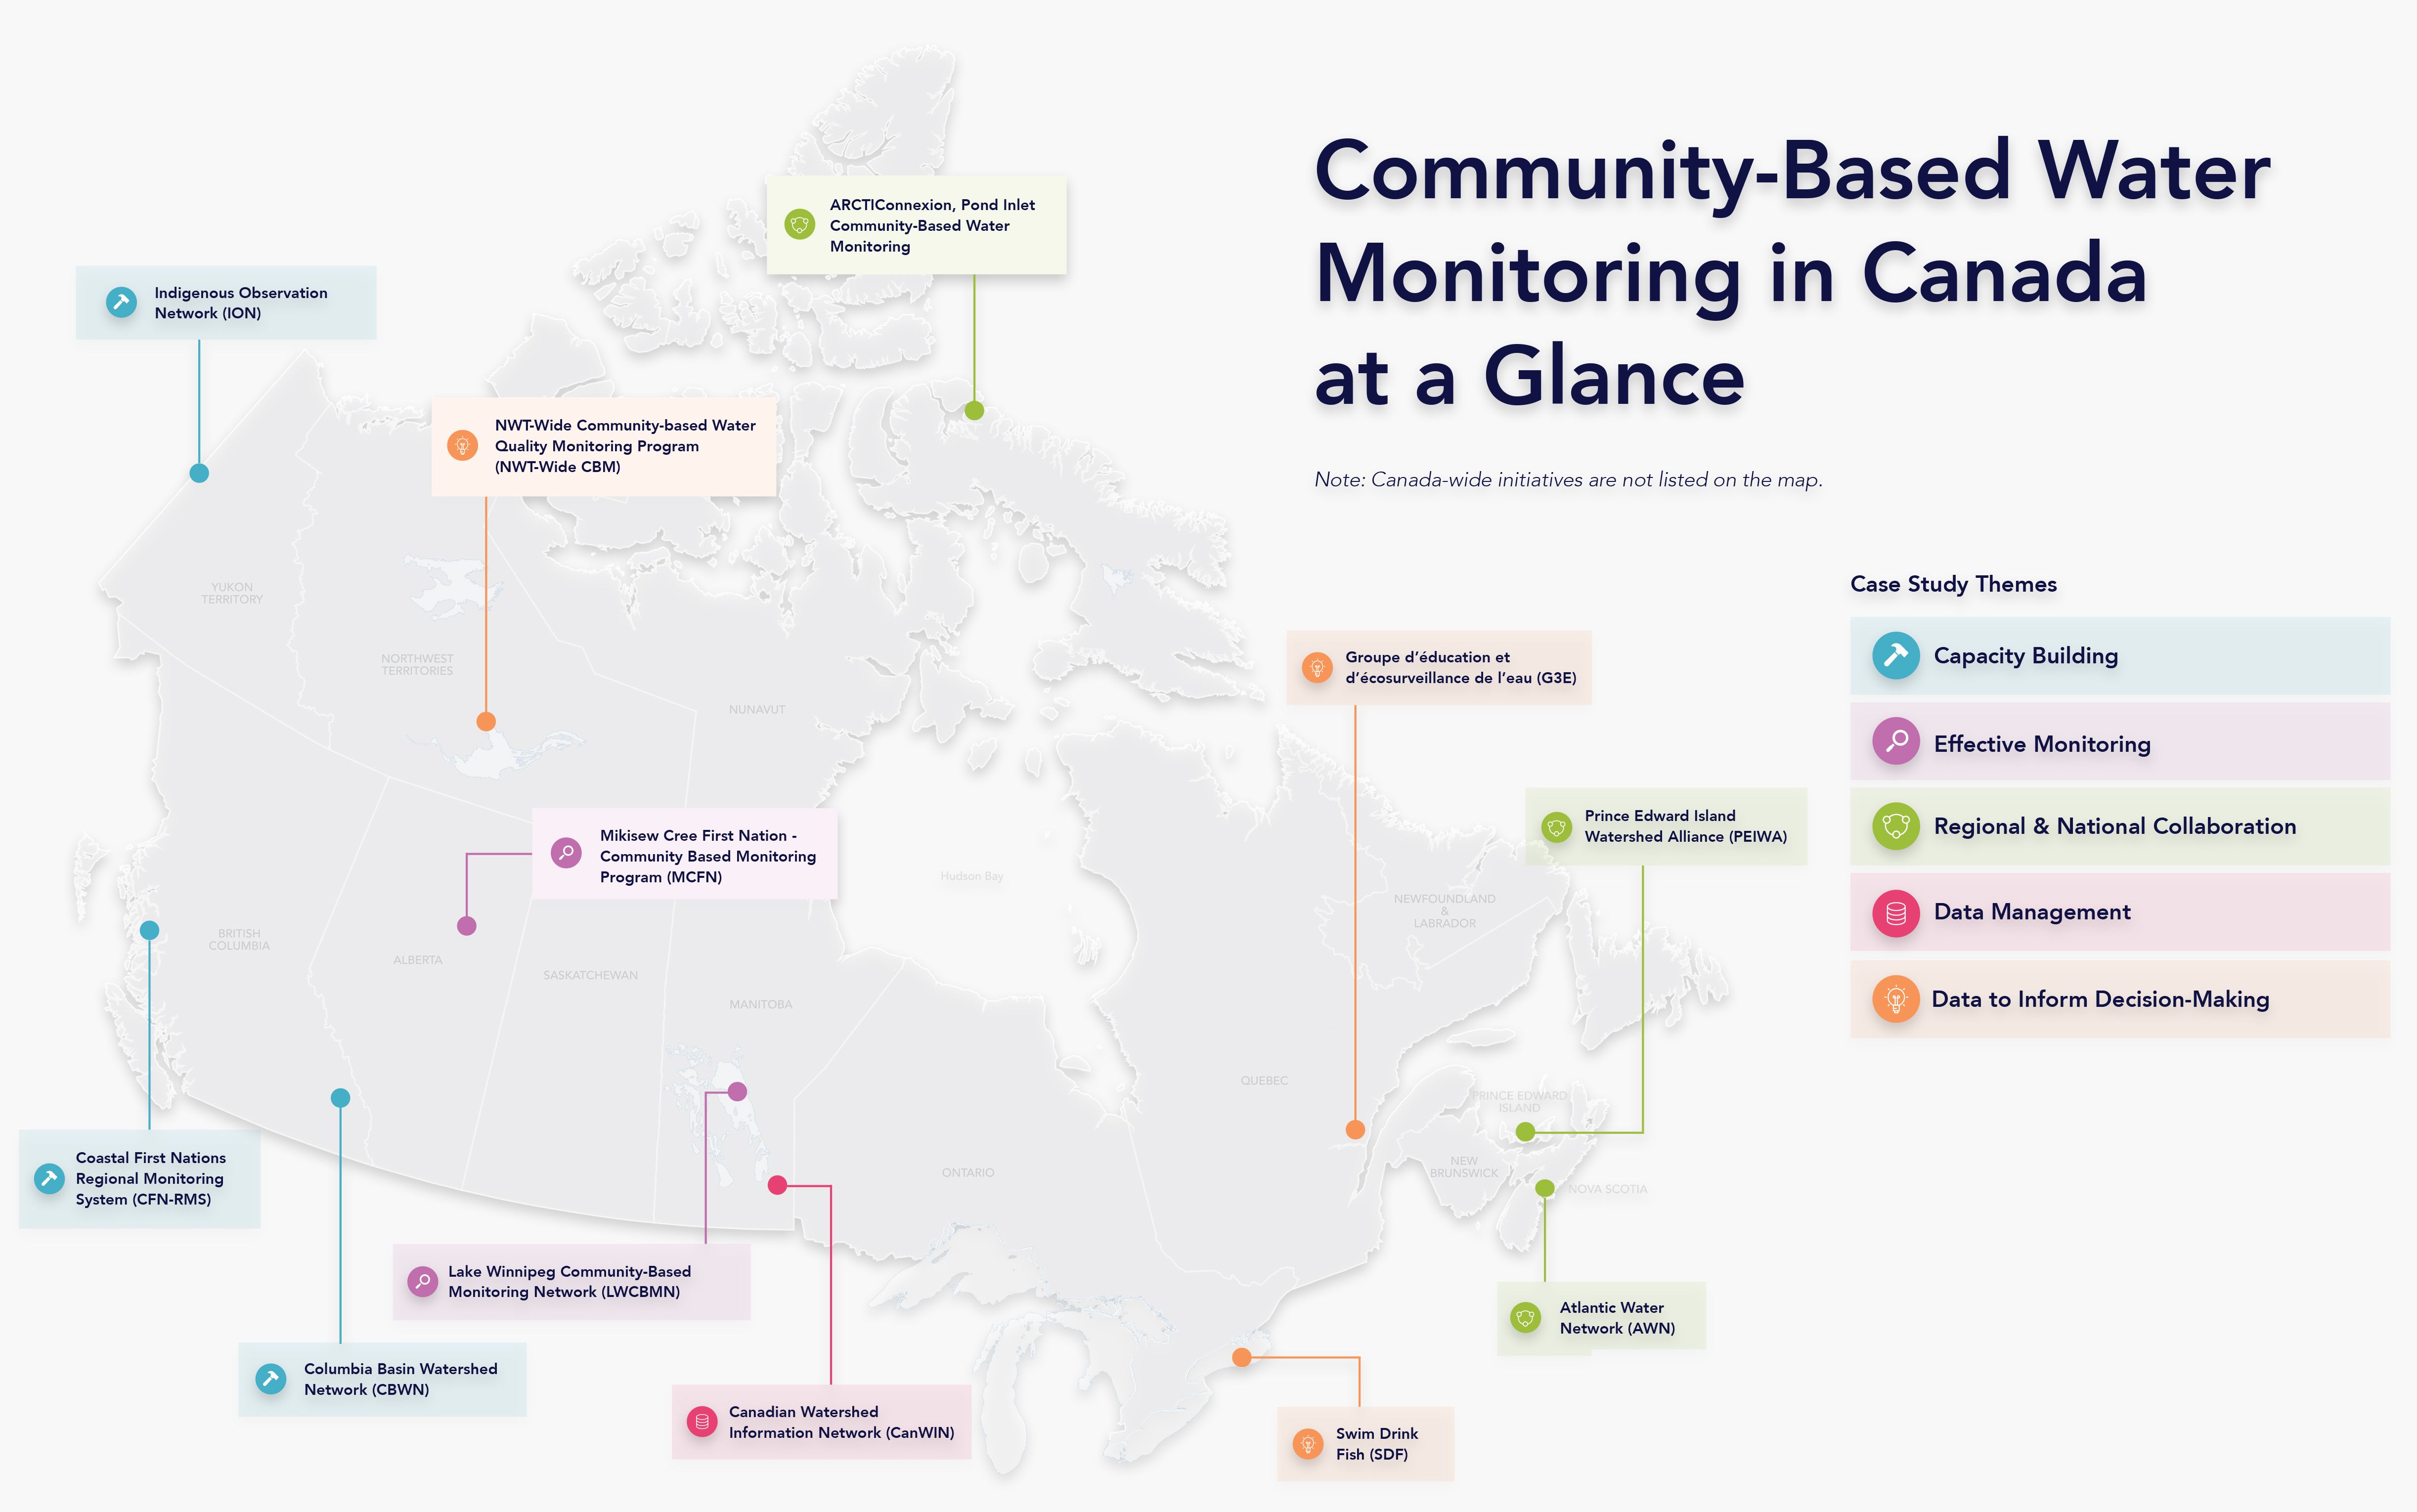 Community-based Water Monitoring in Canada at a Glance